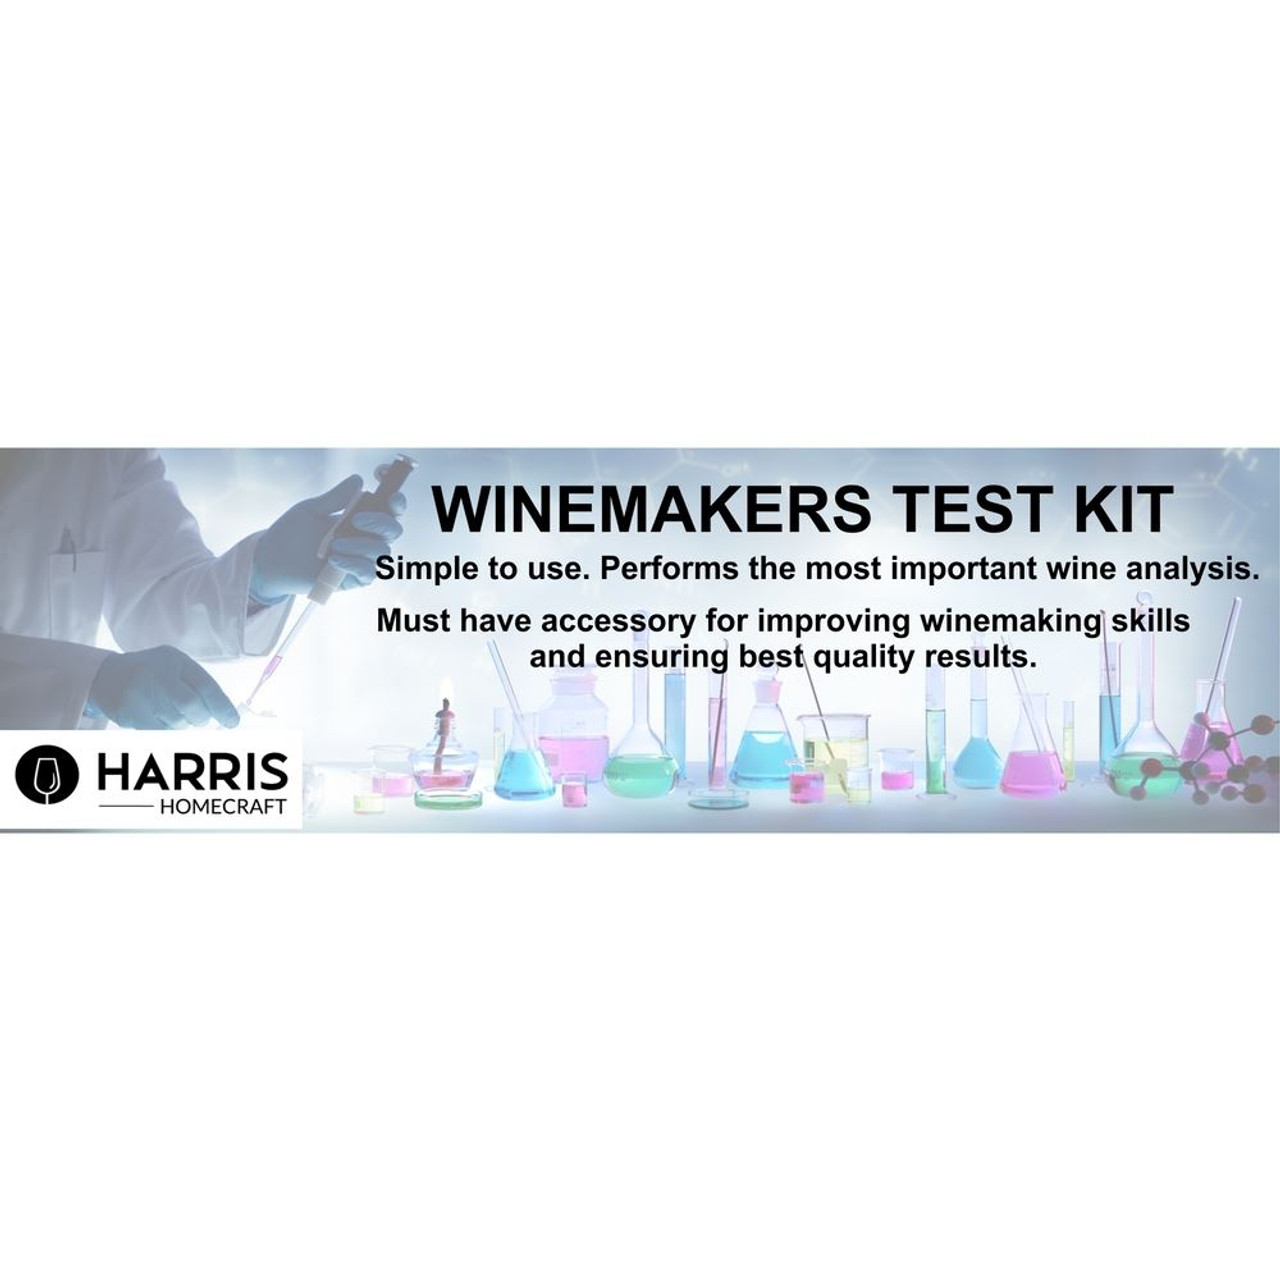 Harris Winemakers Test Kit to analys wine wort and water to maximise performance